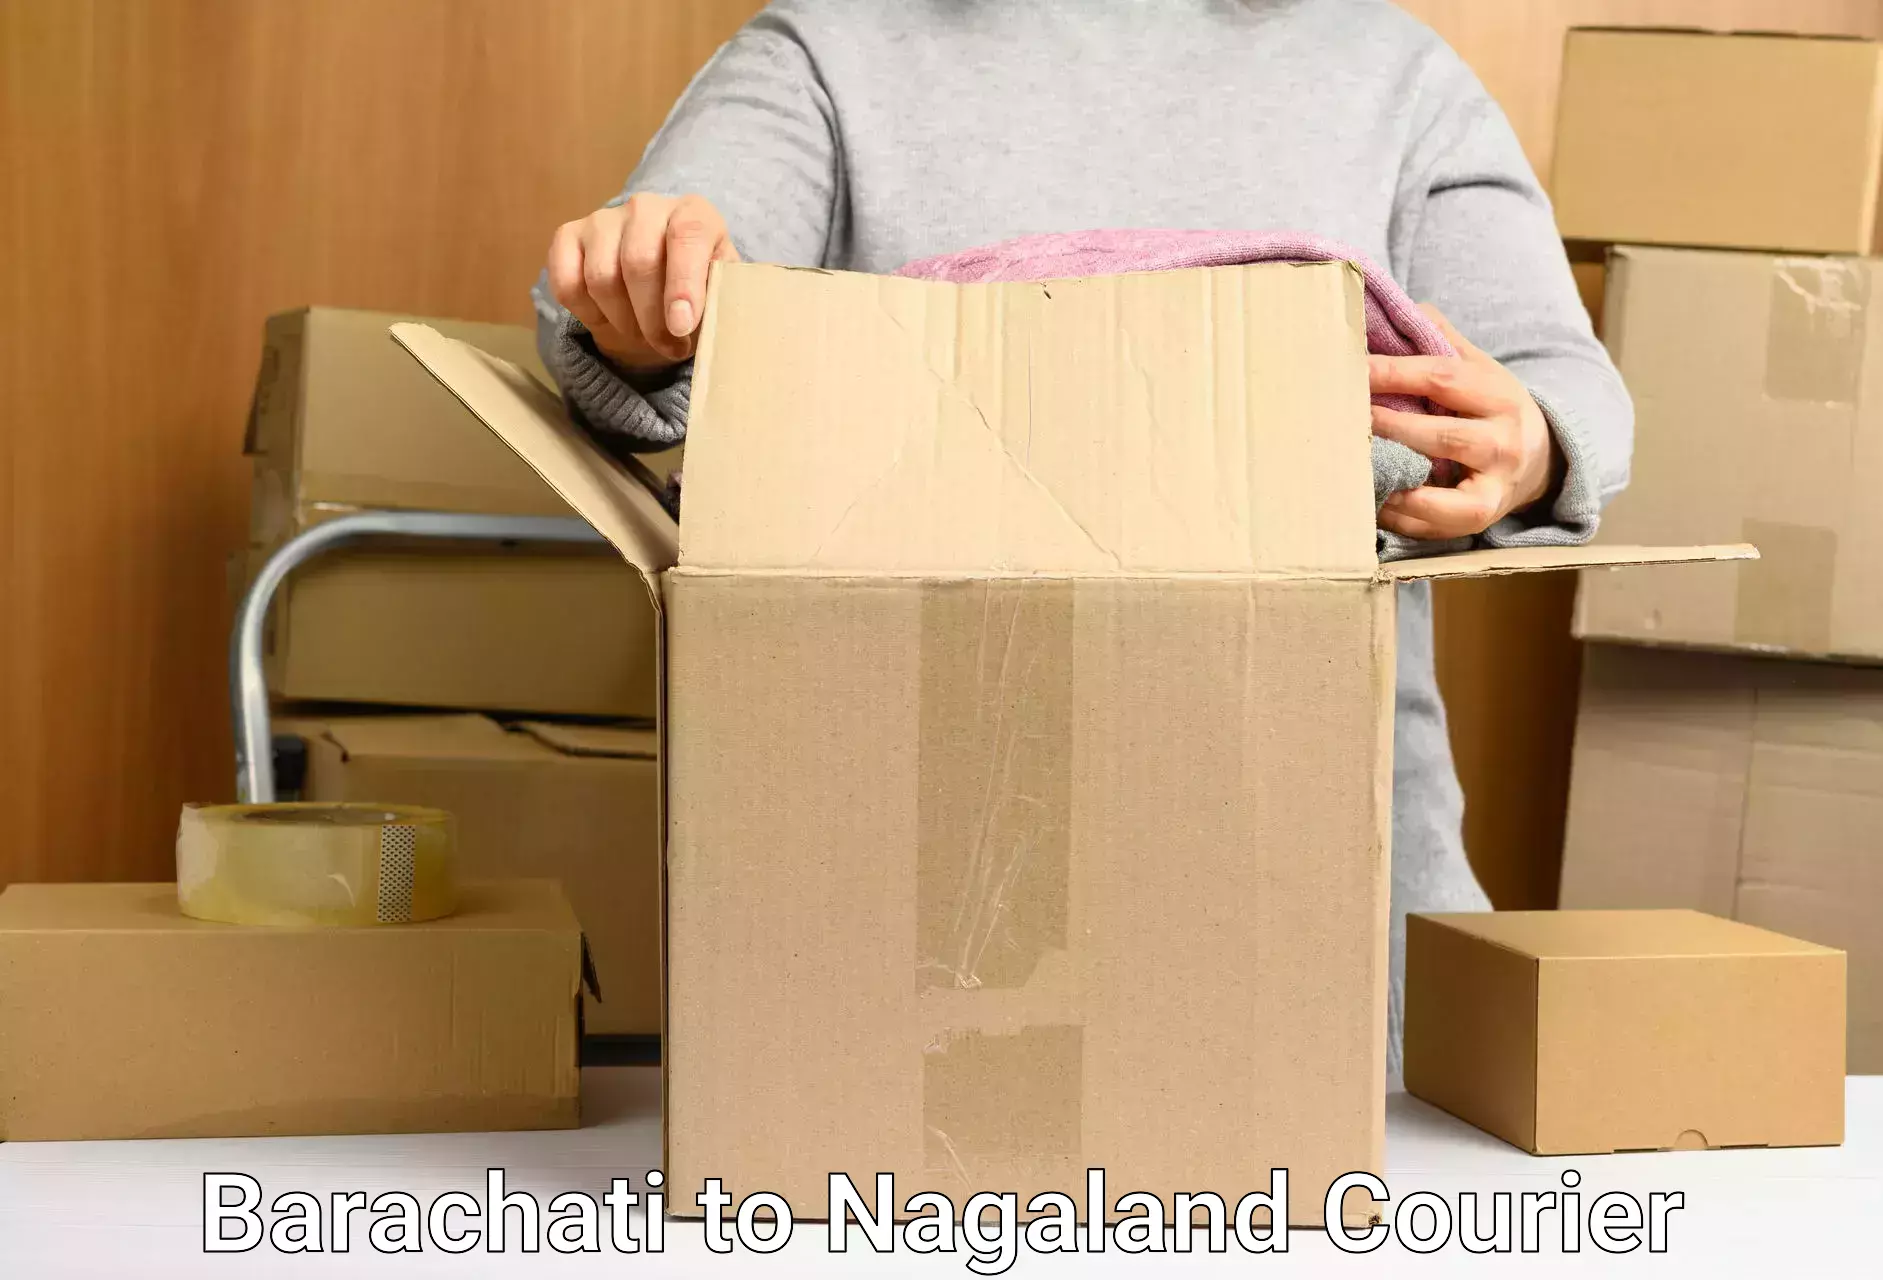 24-hour delivery options in Barachati to Nagaland